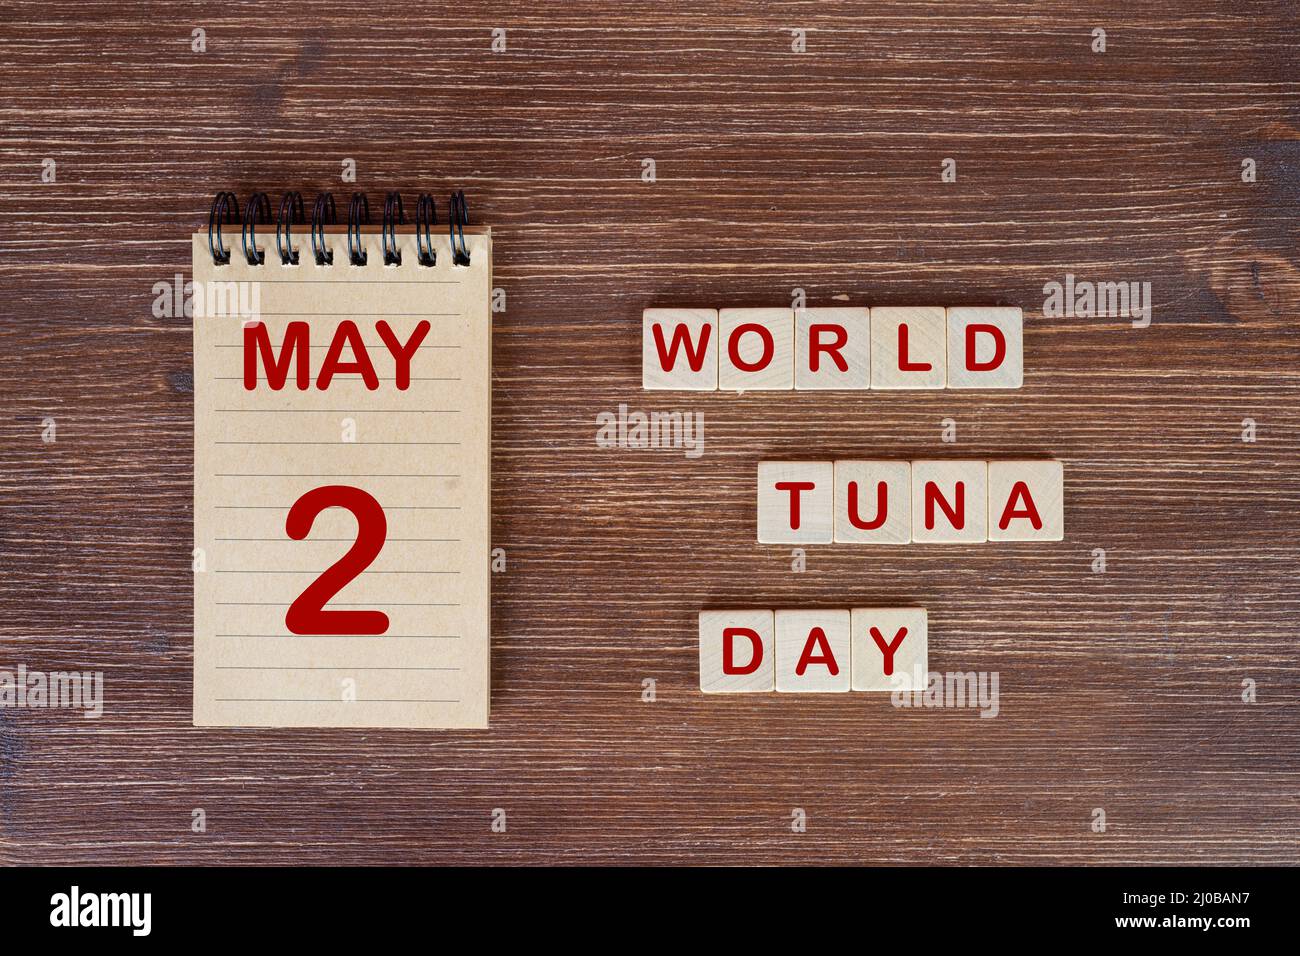 The celebration of the  World Tuna Day the May 2 Stock Photo